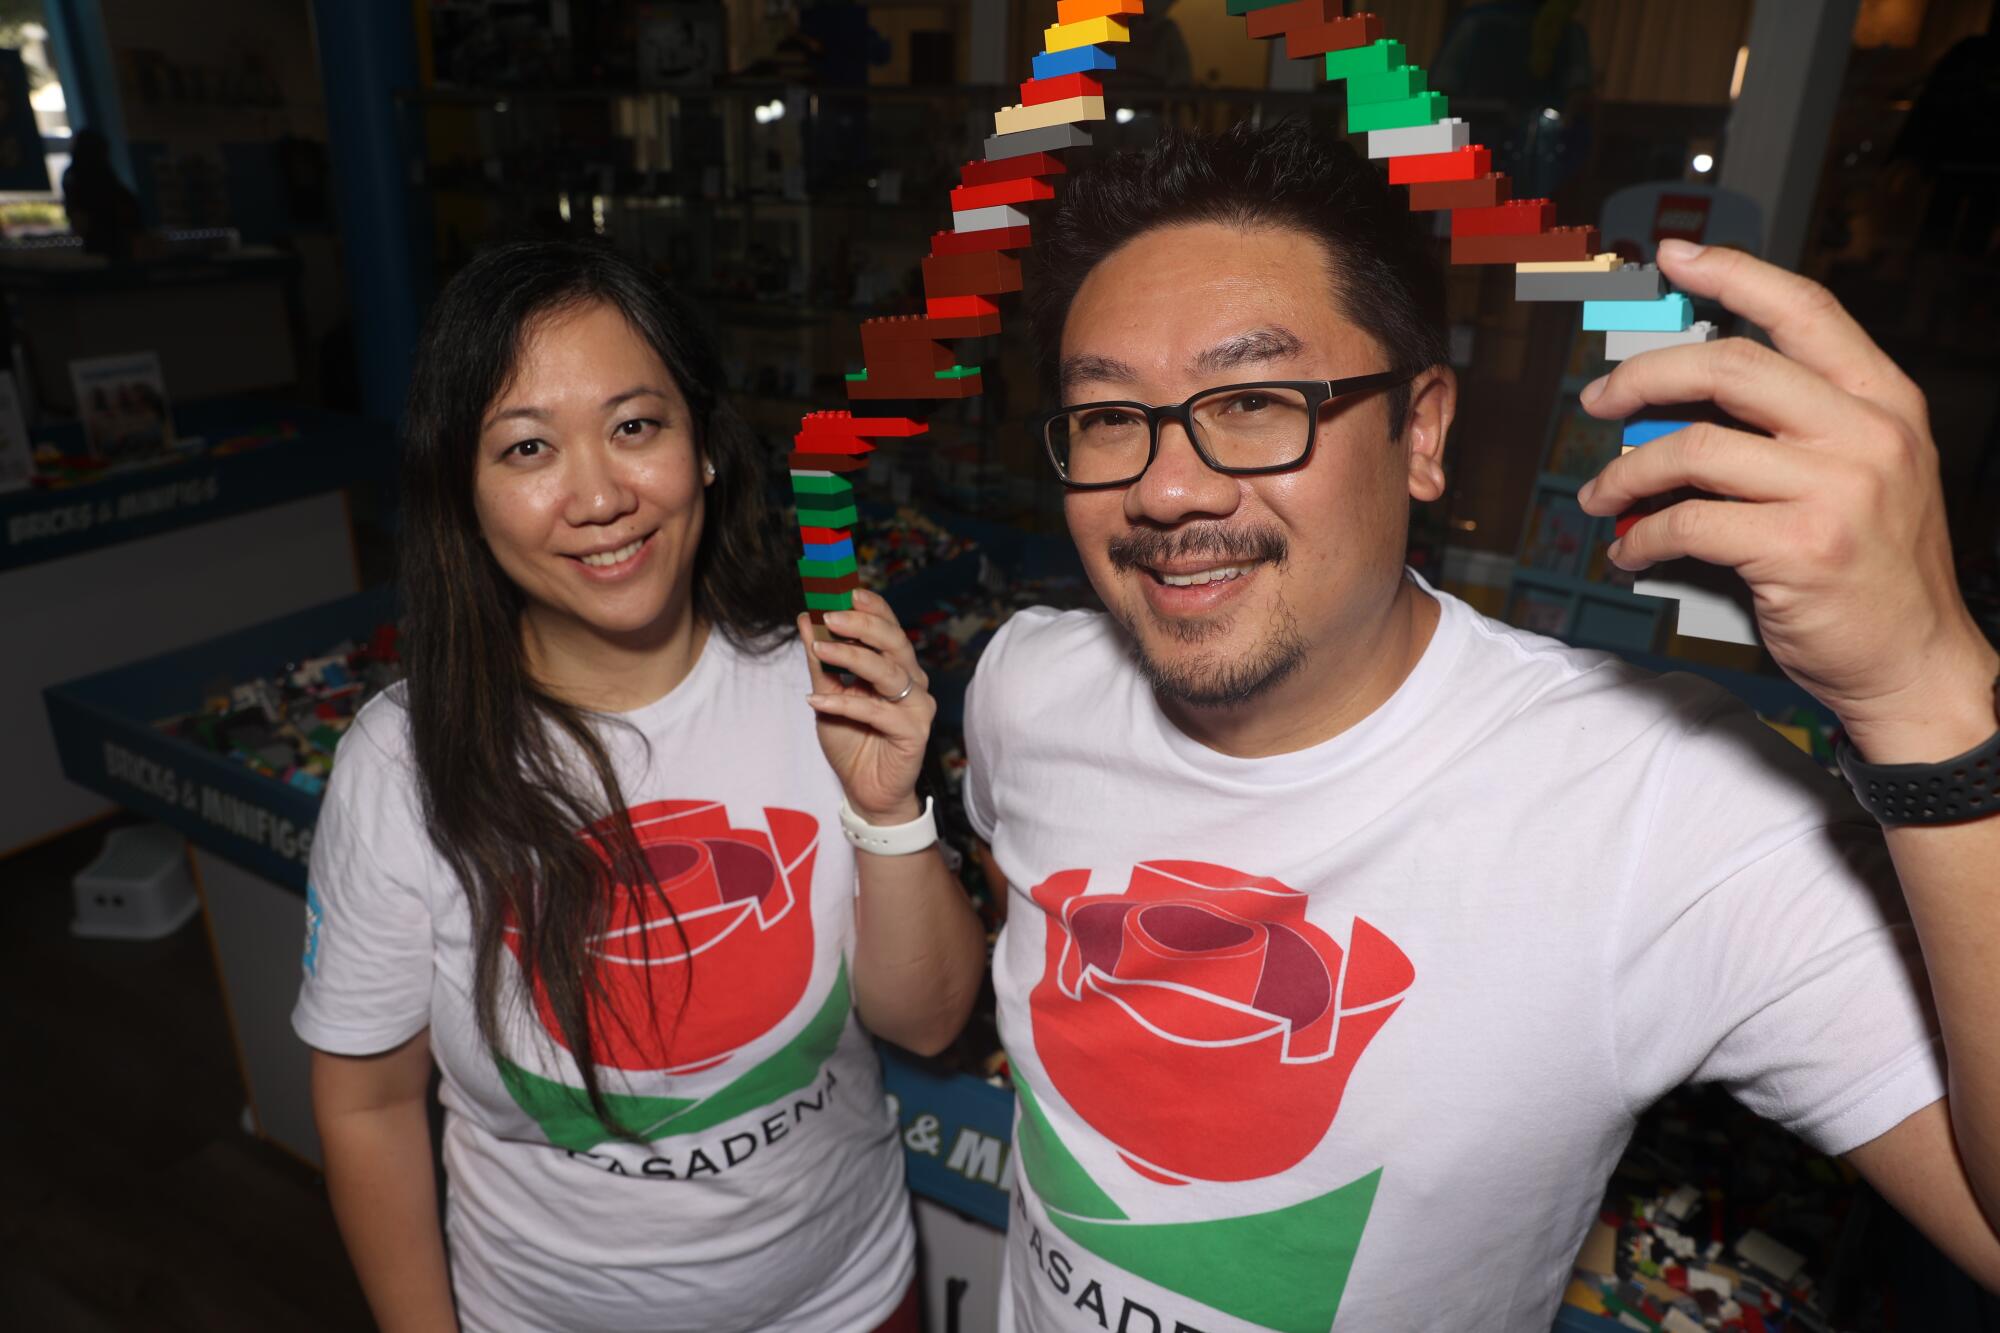 Betty Poquez, left, Rob Poquez hold an arch of Lego bricks while wearing shirts with a rose design and the name "Pasadena"